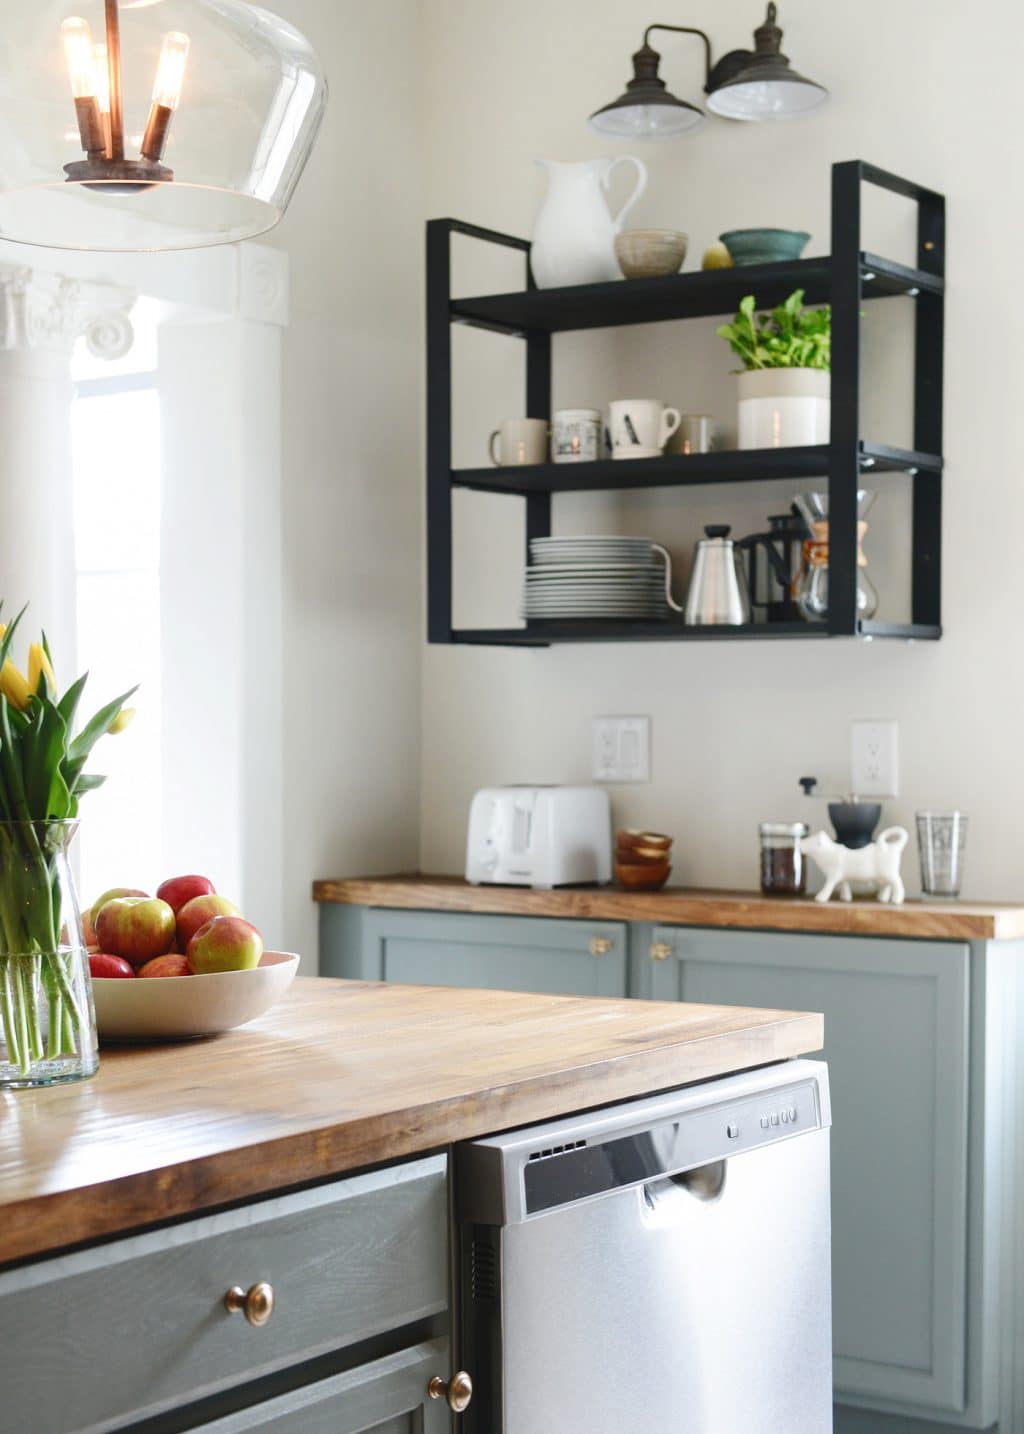 We Tried It: “The Home Edit” Kitchen Makeover (Budget: $100)